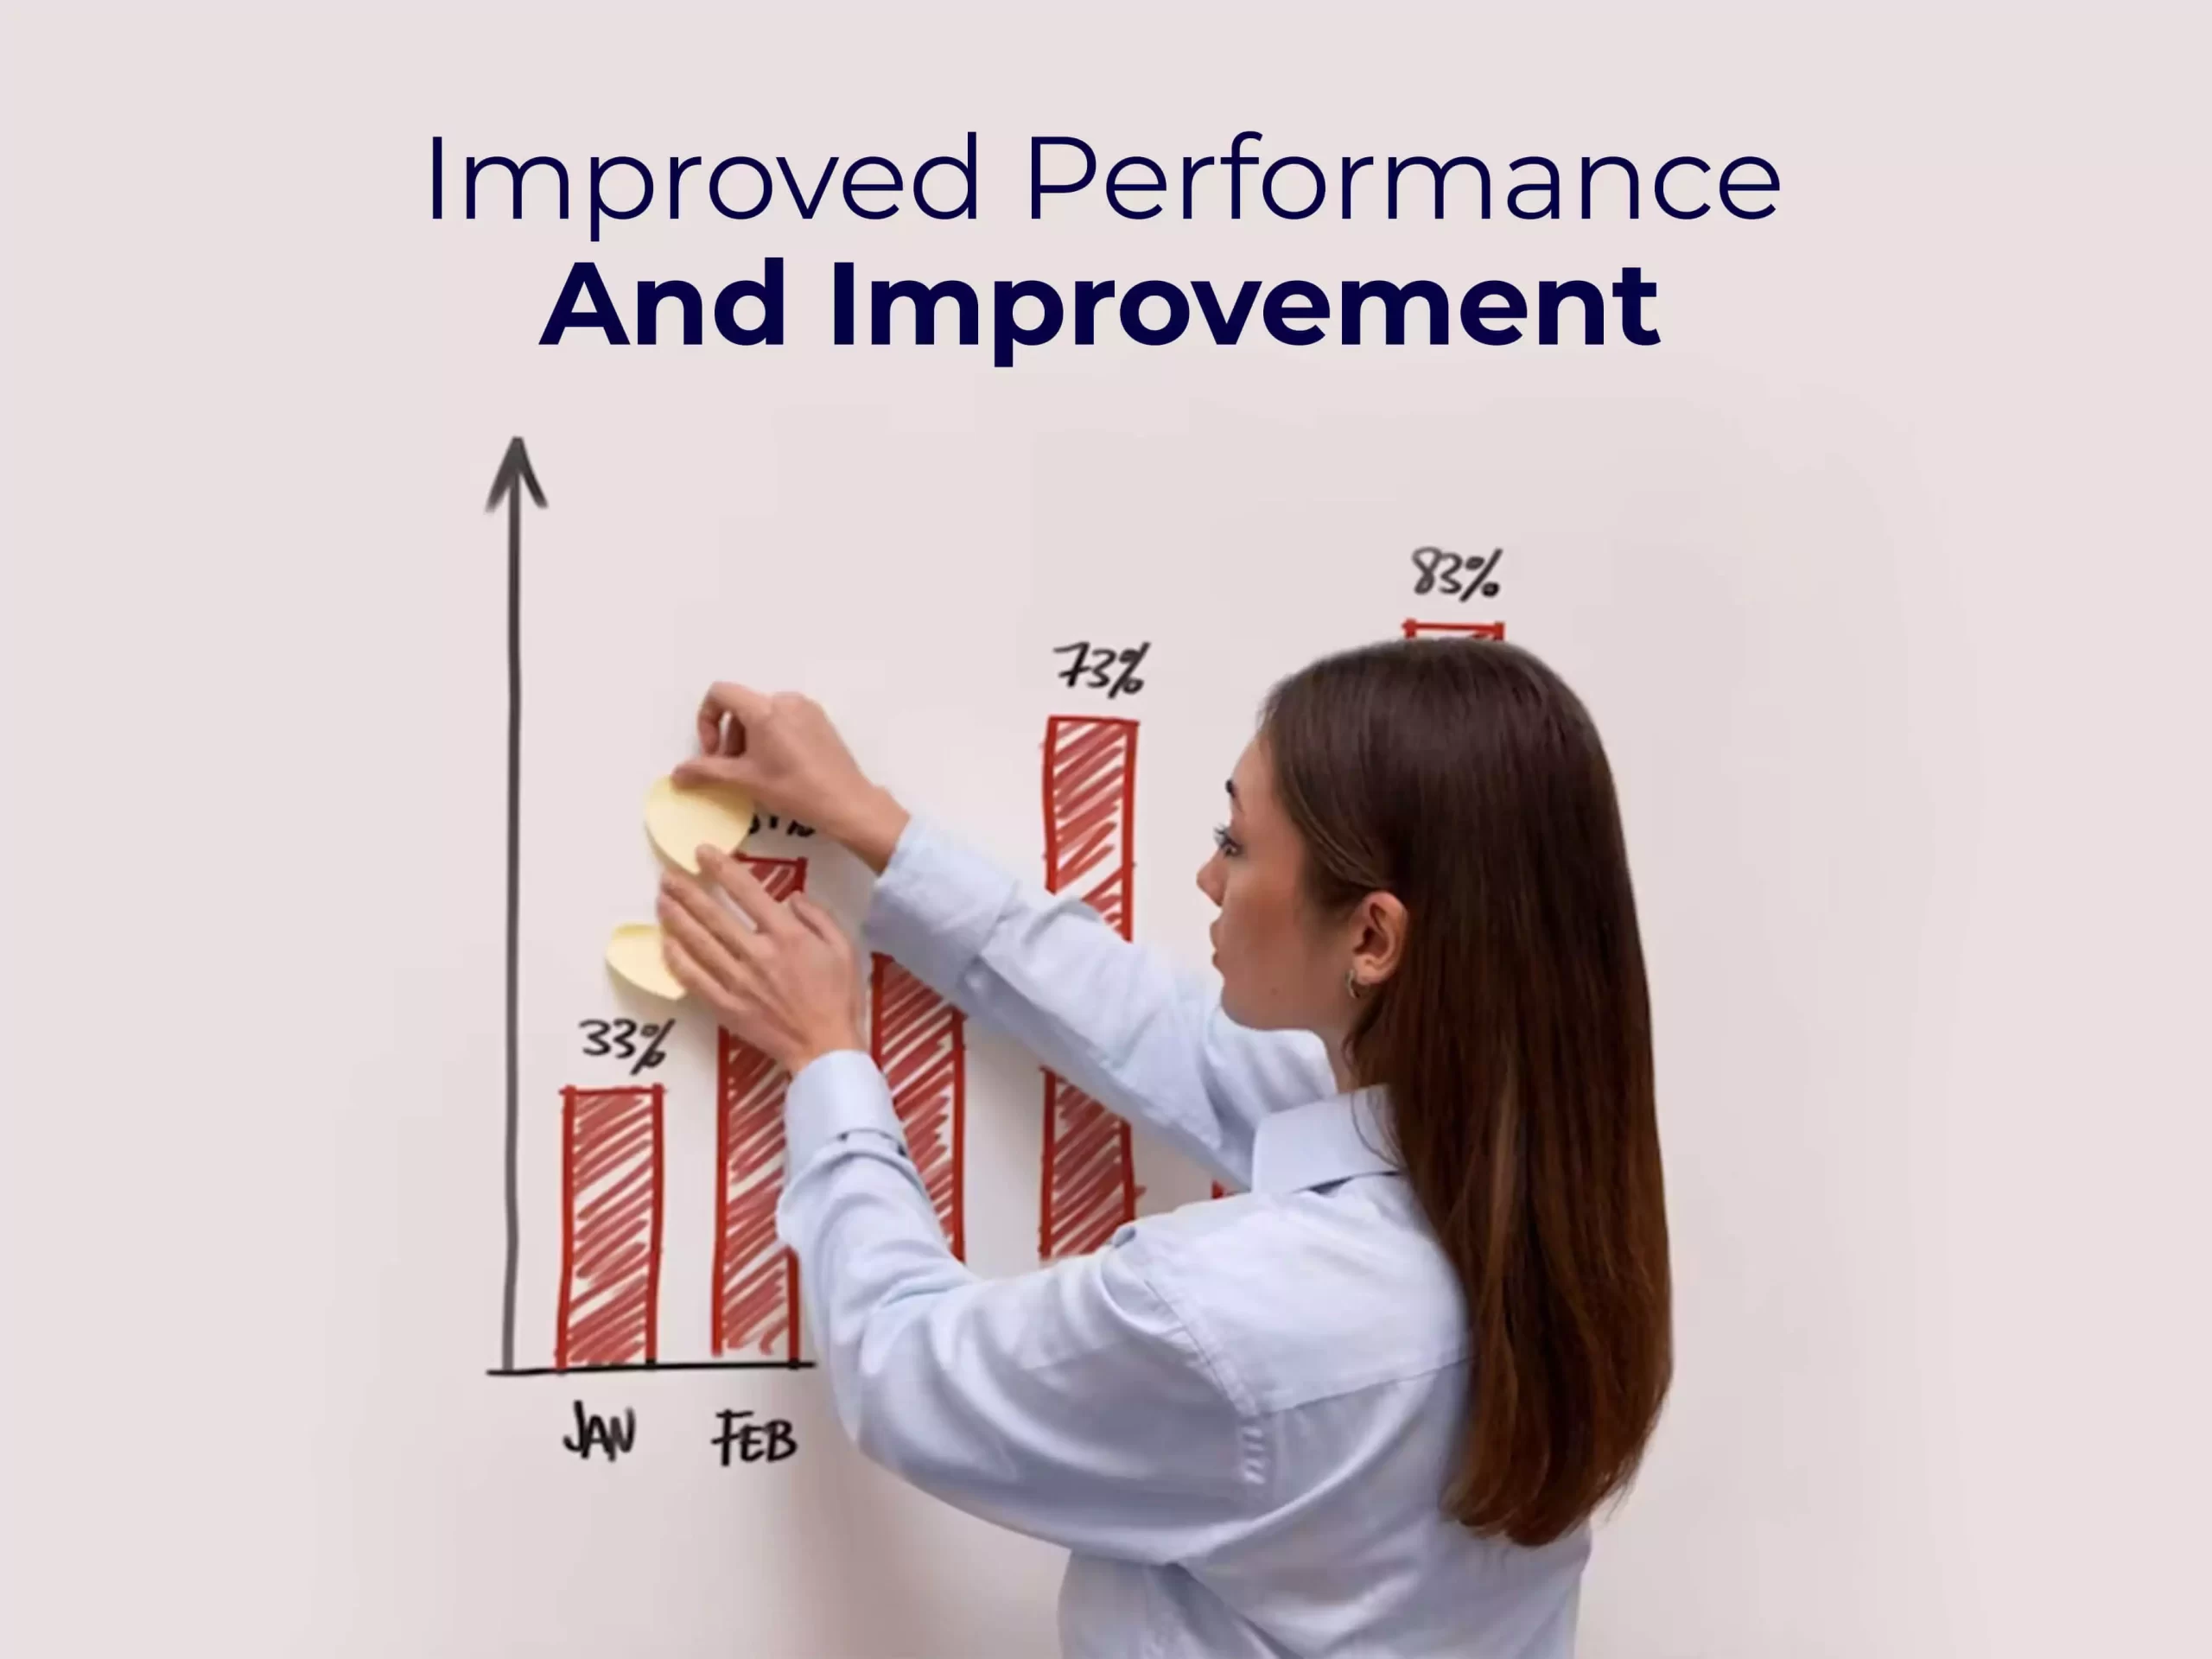 Improved performance and improvement